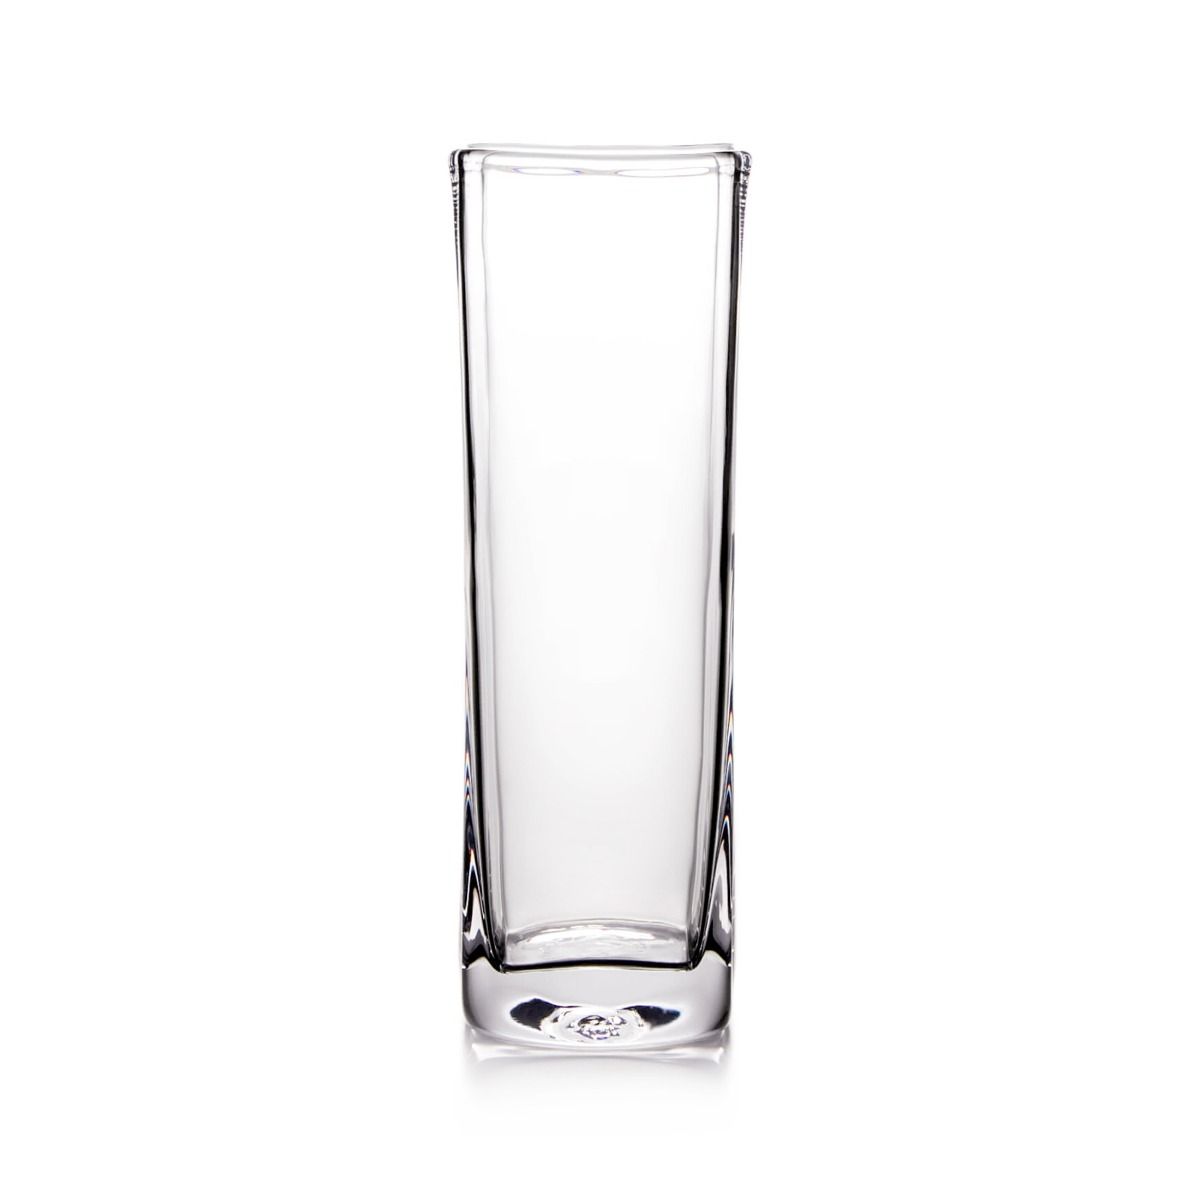 SIMON PEARCE VASE GLASS WOODBURY (Available in 2 Sizes)